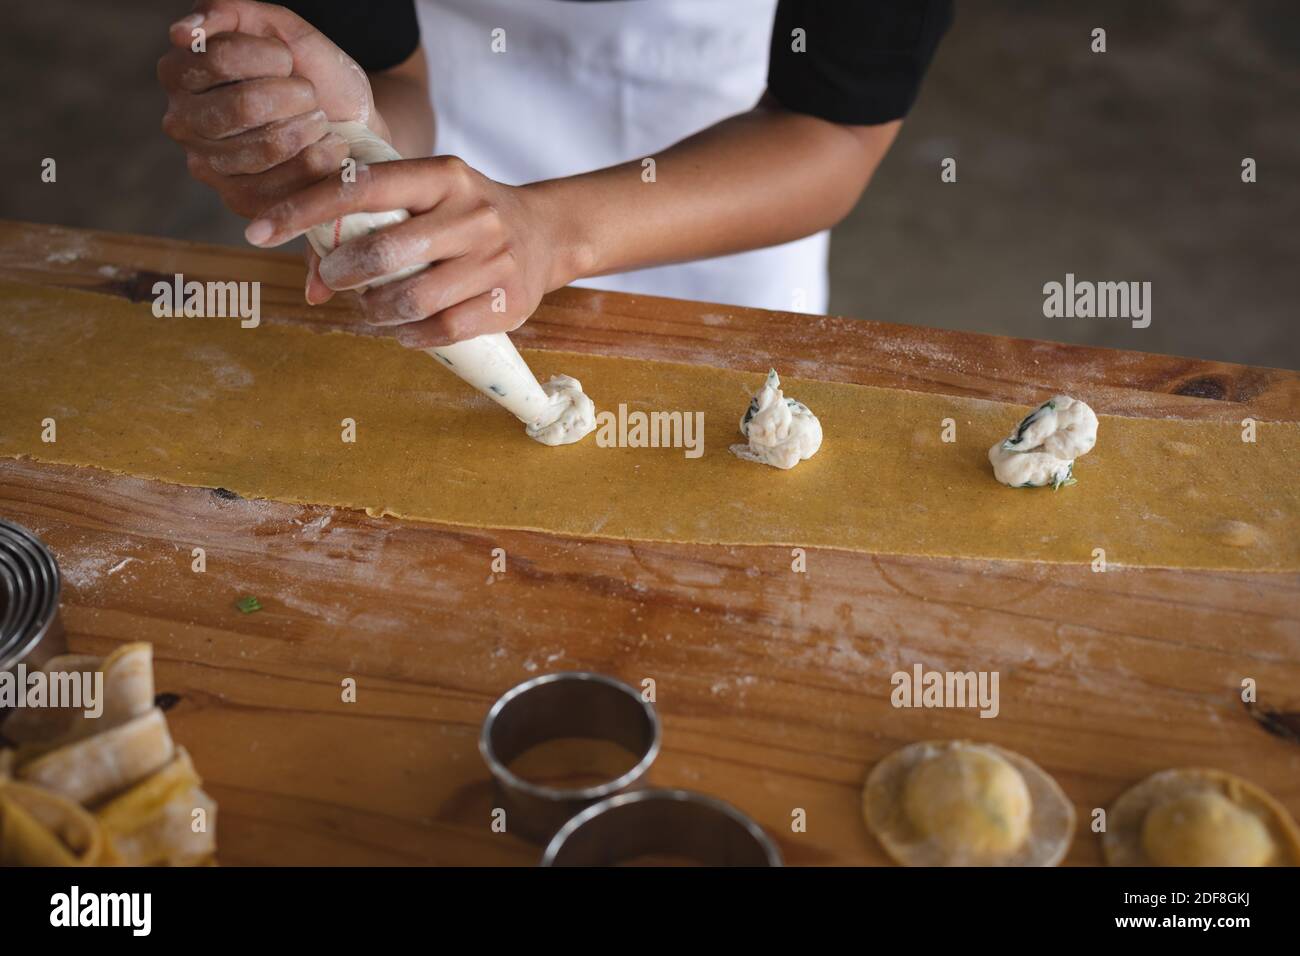 Mid section of chef adding fillings over ravioli pasta sheet at restaurant kitchen Stock Photo